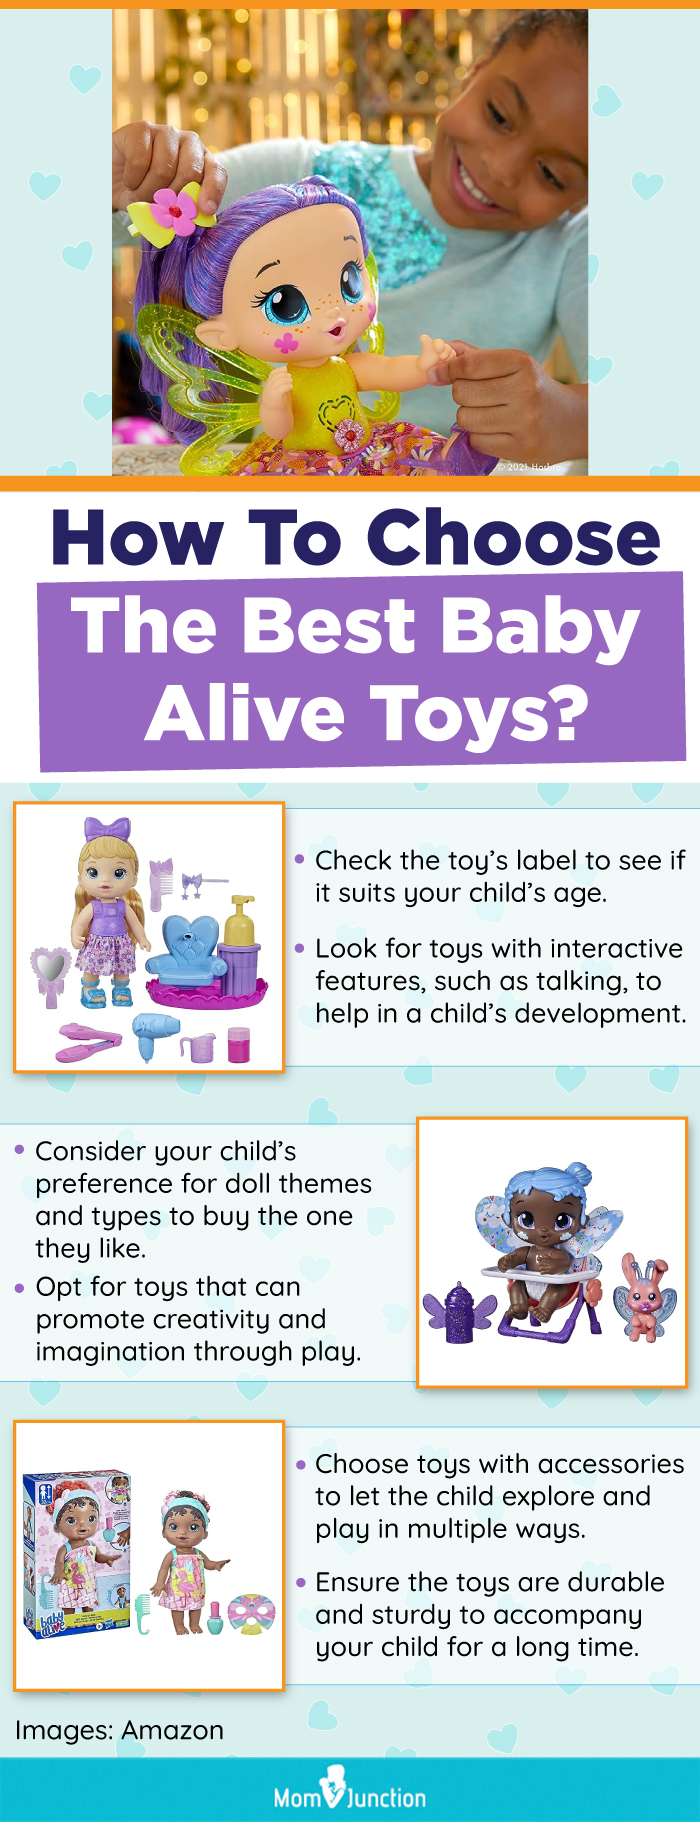 How To Choose The Best Baby Alive Toys (infographic)